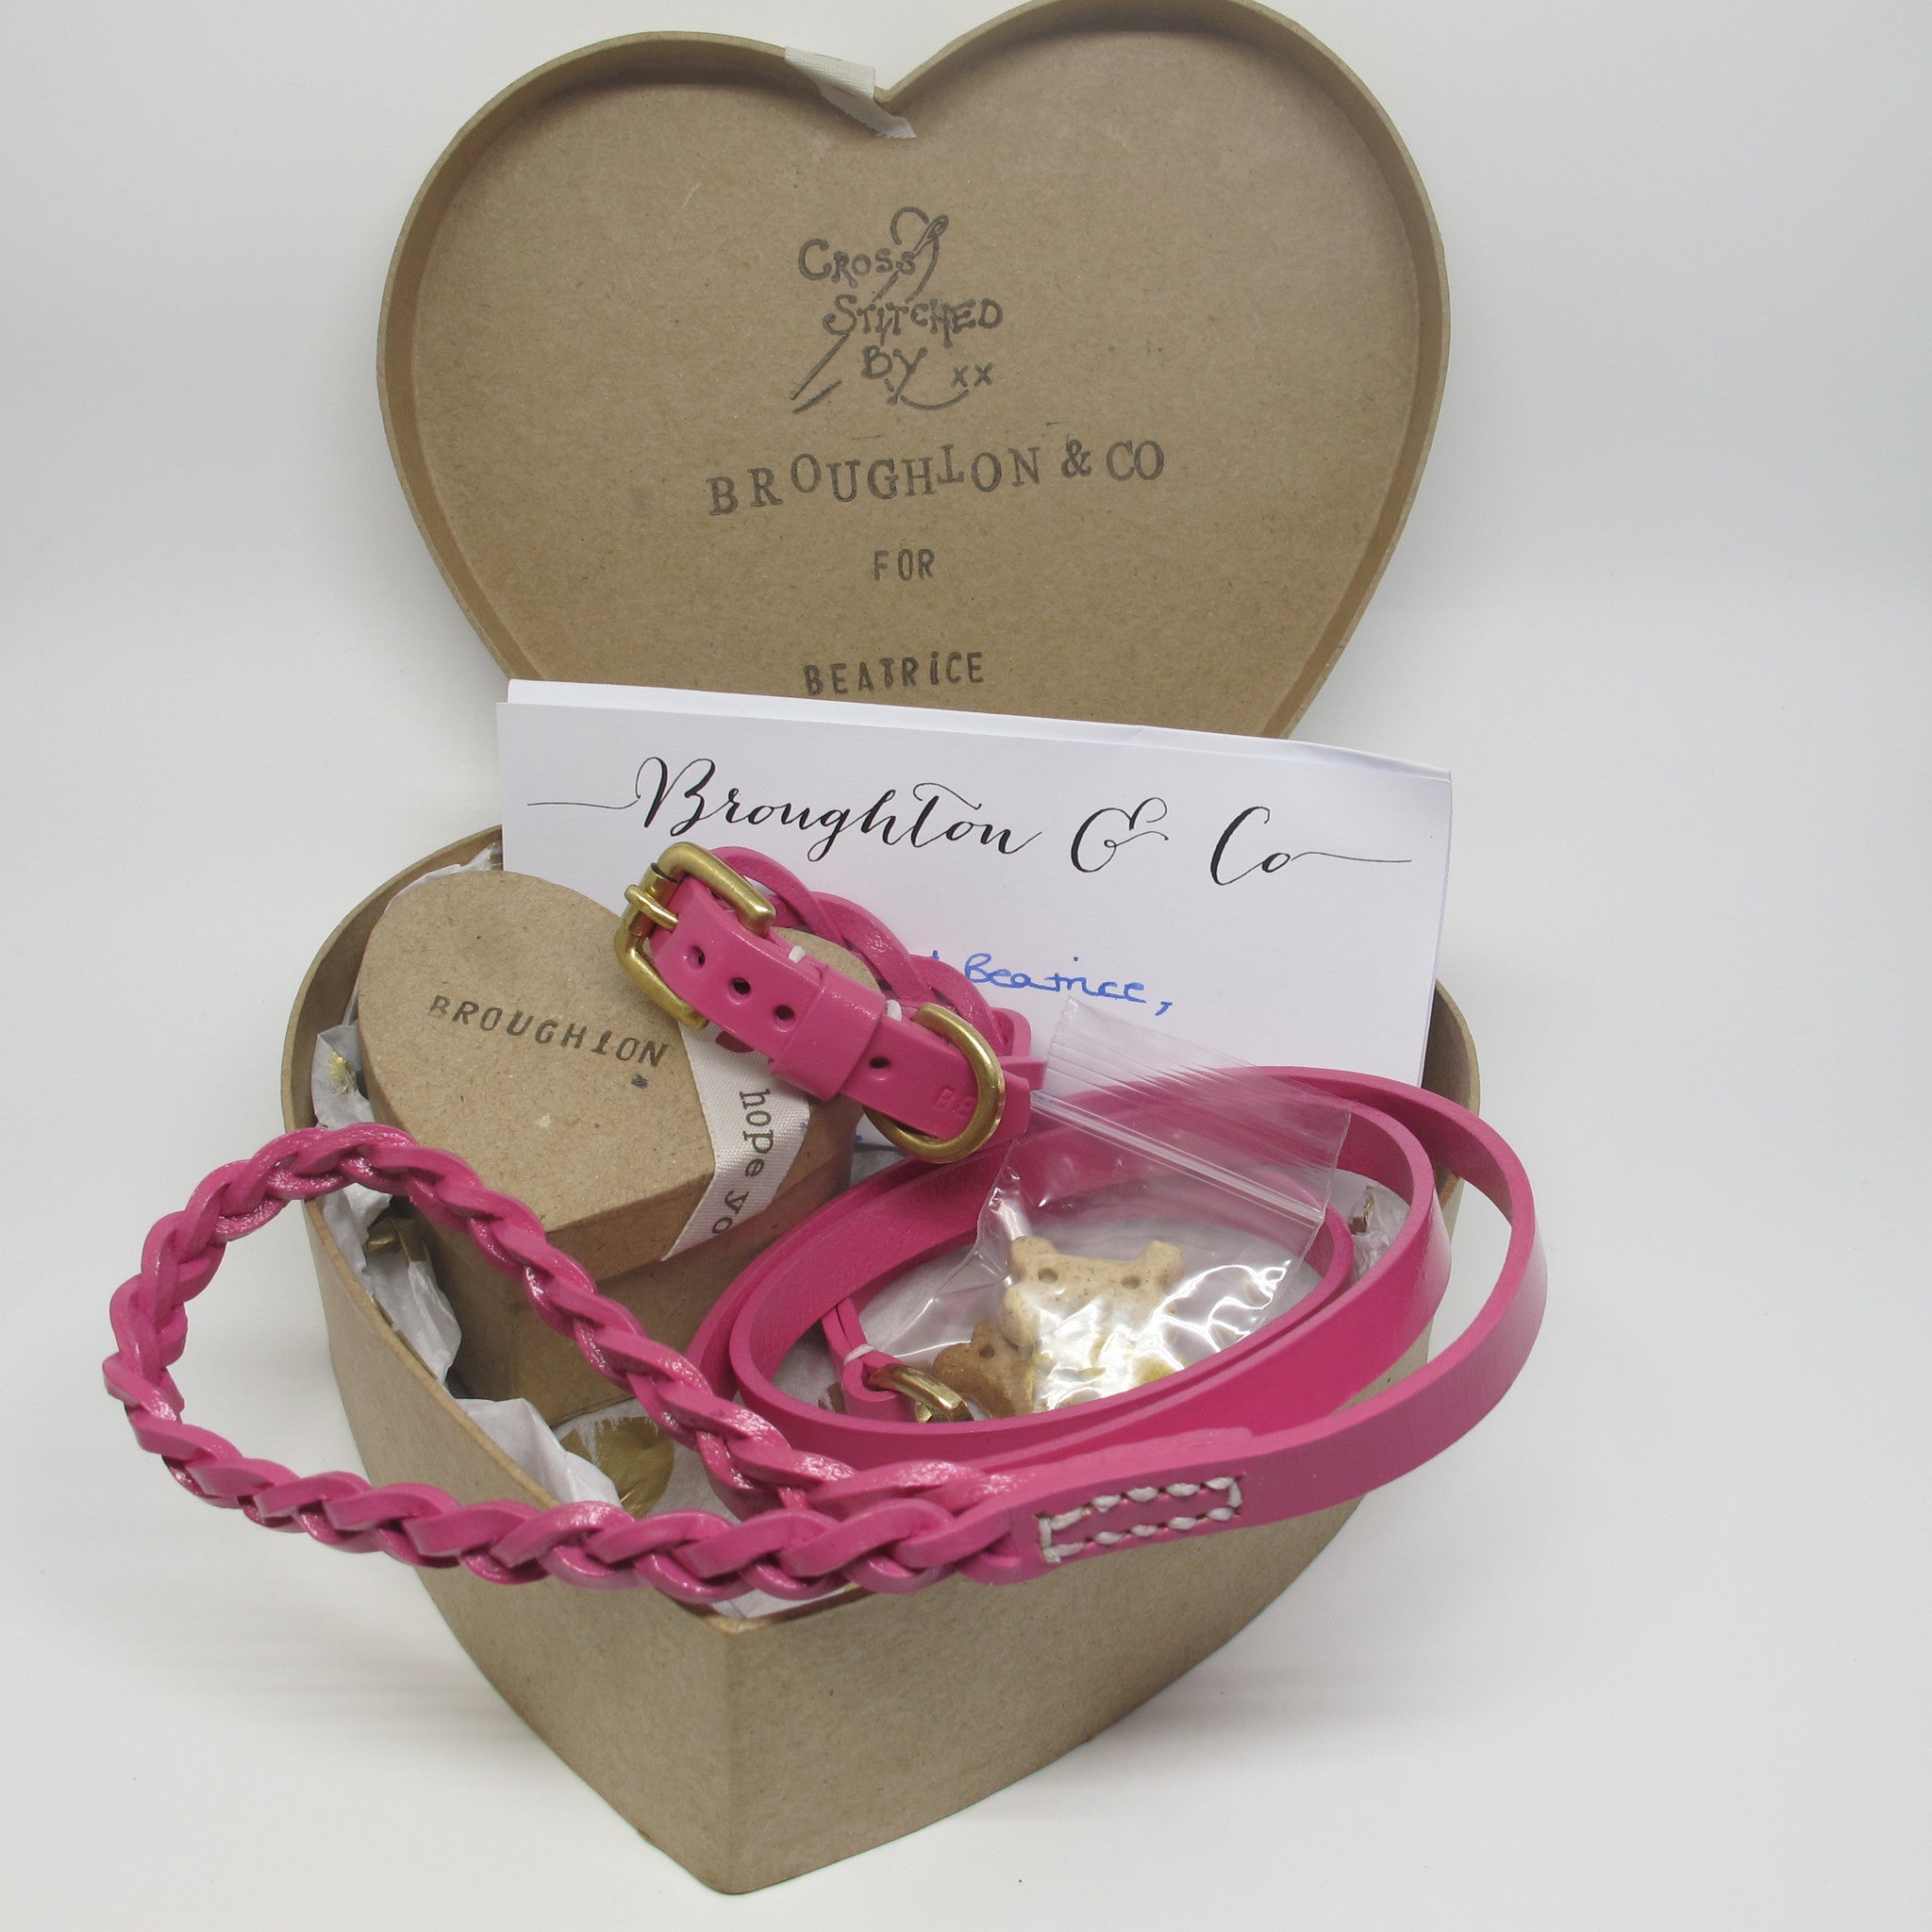 Personalised Hot Pink Plaited Leather Dog Collar and Lead Set